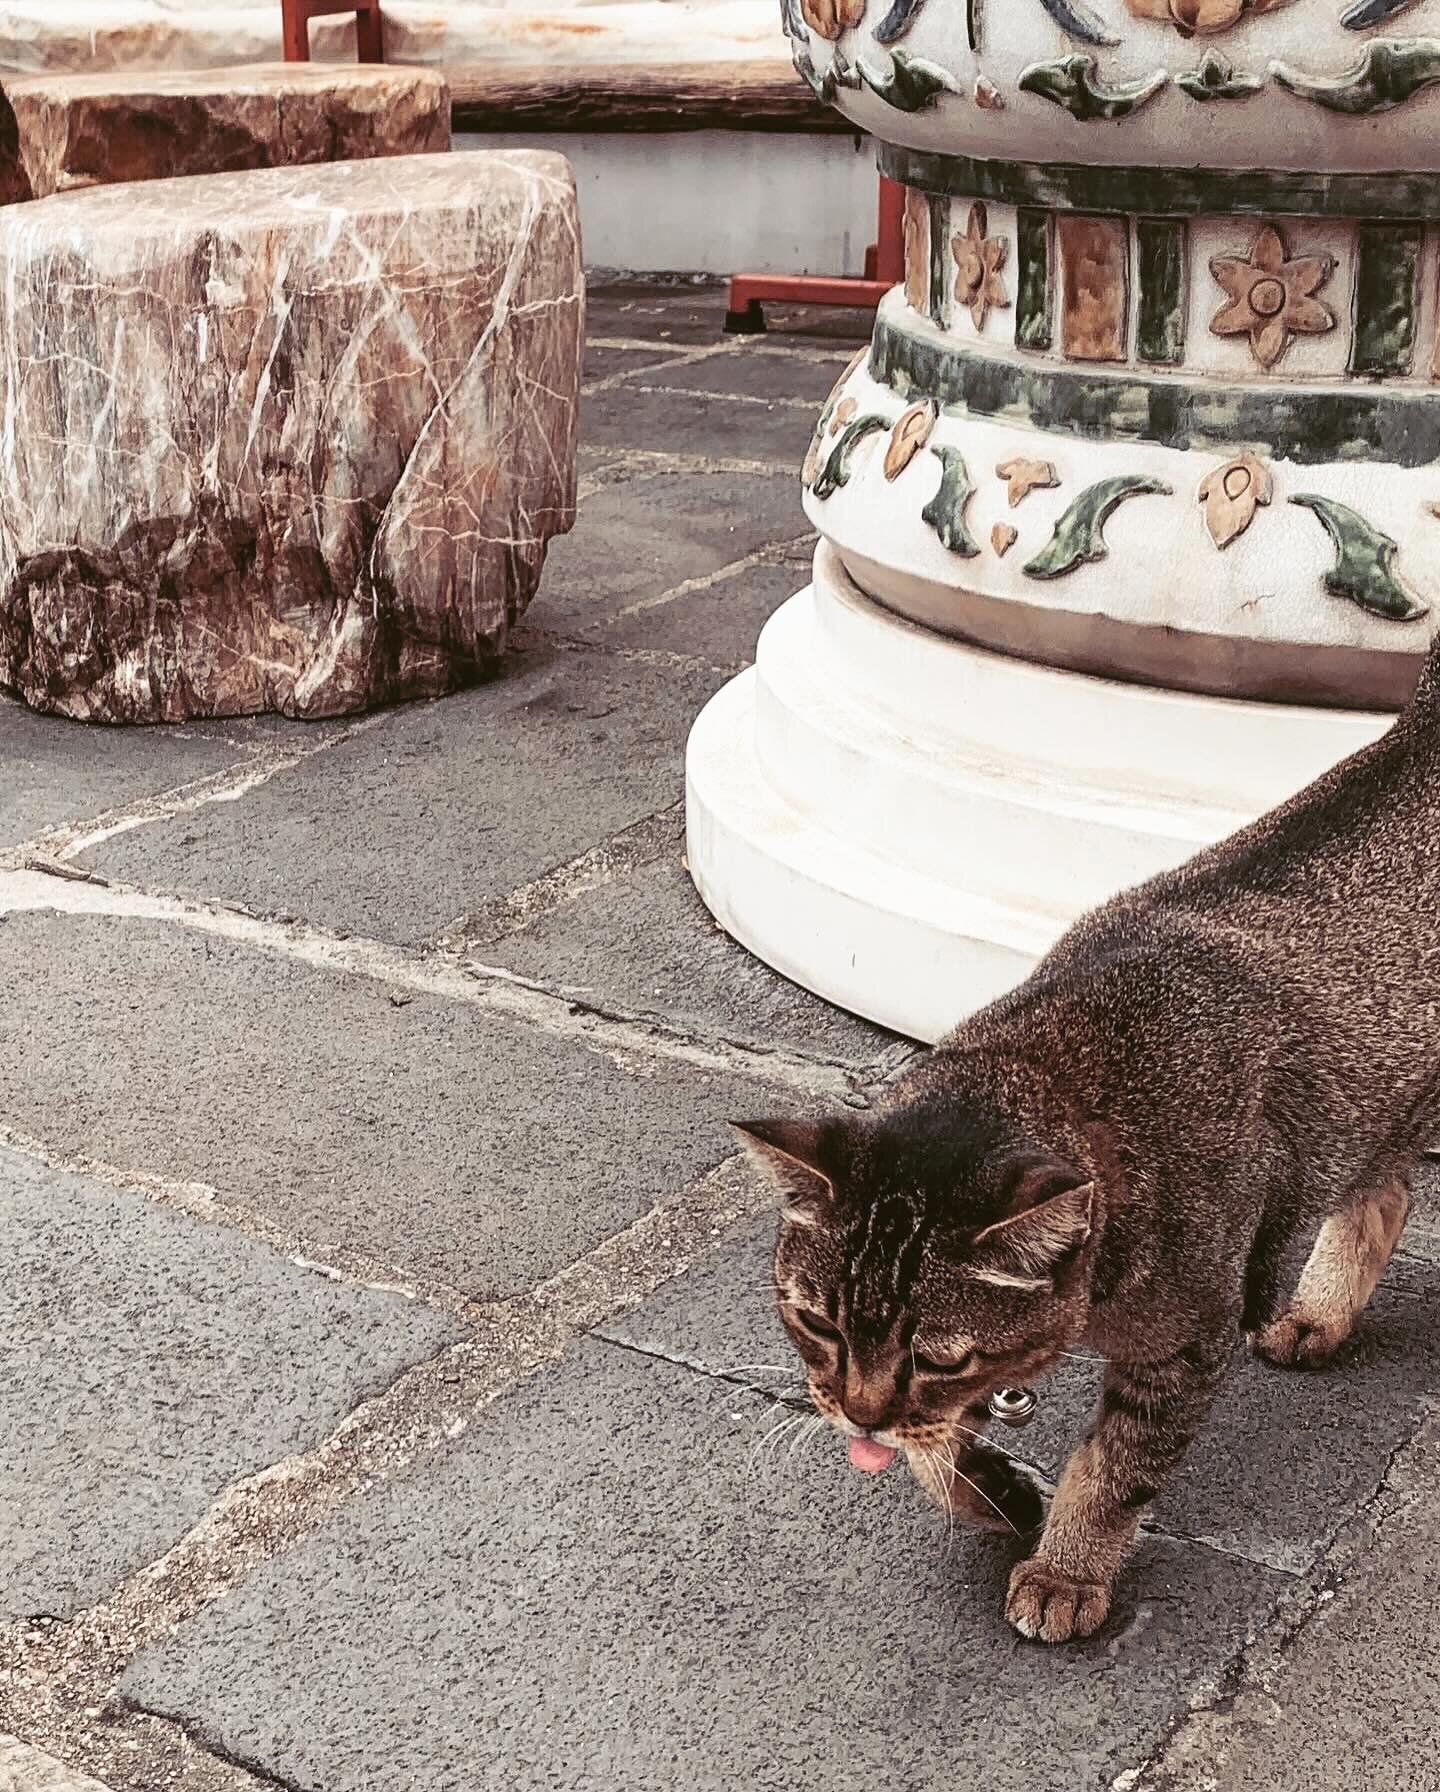 I can never pass up the chance to take pics of cats while I travel. 😻😸🇹🇭 @charlottescatshack #wataruntemple #catoftheday #catladytravellog